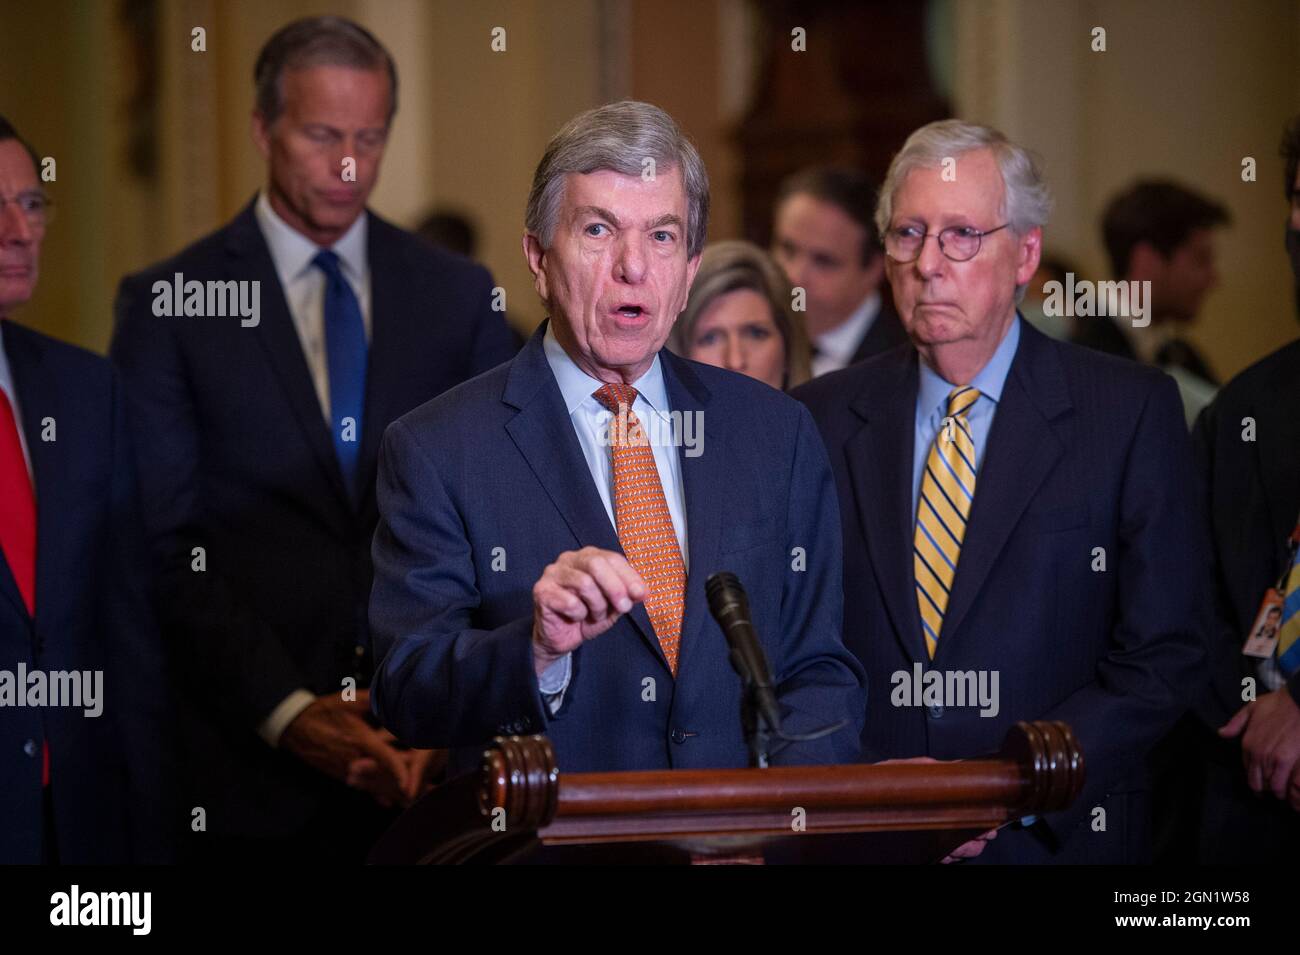 United States Senator Roy Blunt (Republican of Missouri) offers remarks at a press conference following the Senate Republican’s policy luncheon at the US Capitol in Washington, DC, Tuesday, September 21, 2021. Credit: Rod Lamkey / CNP/Sipa USA Stock Photo